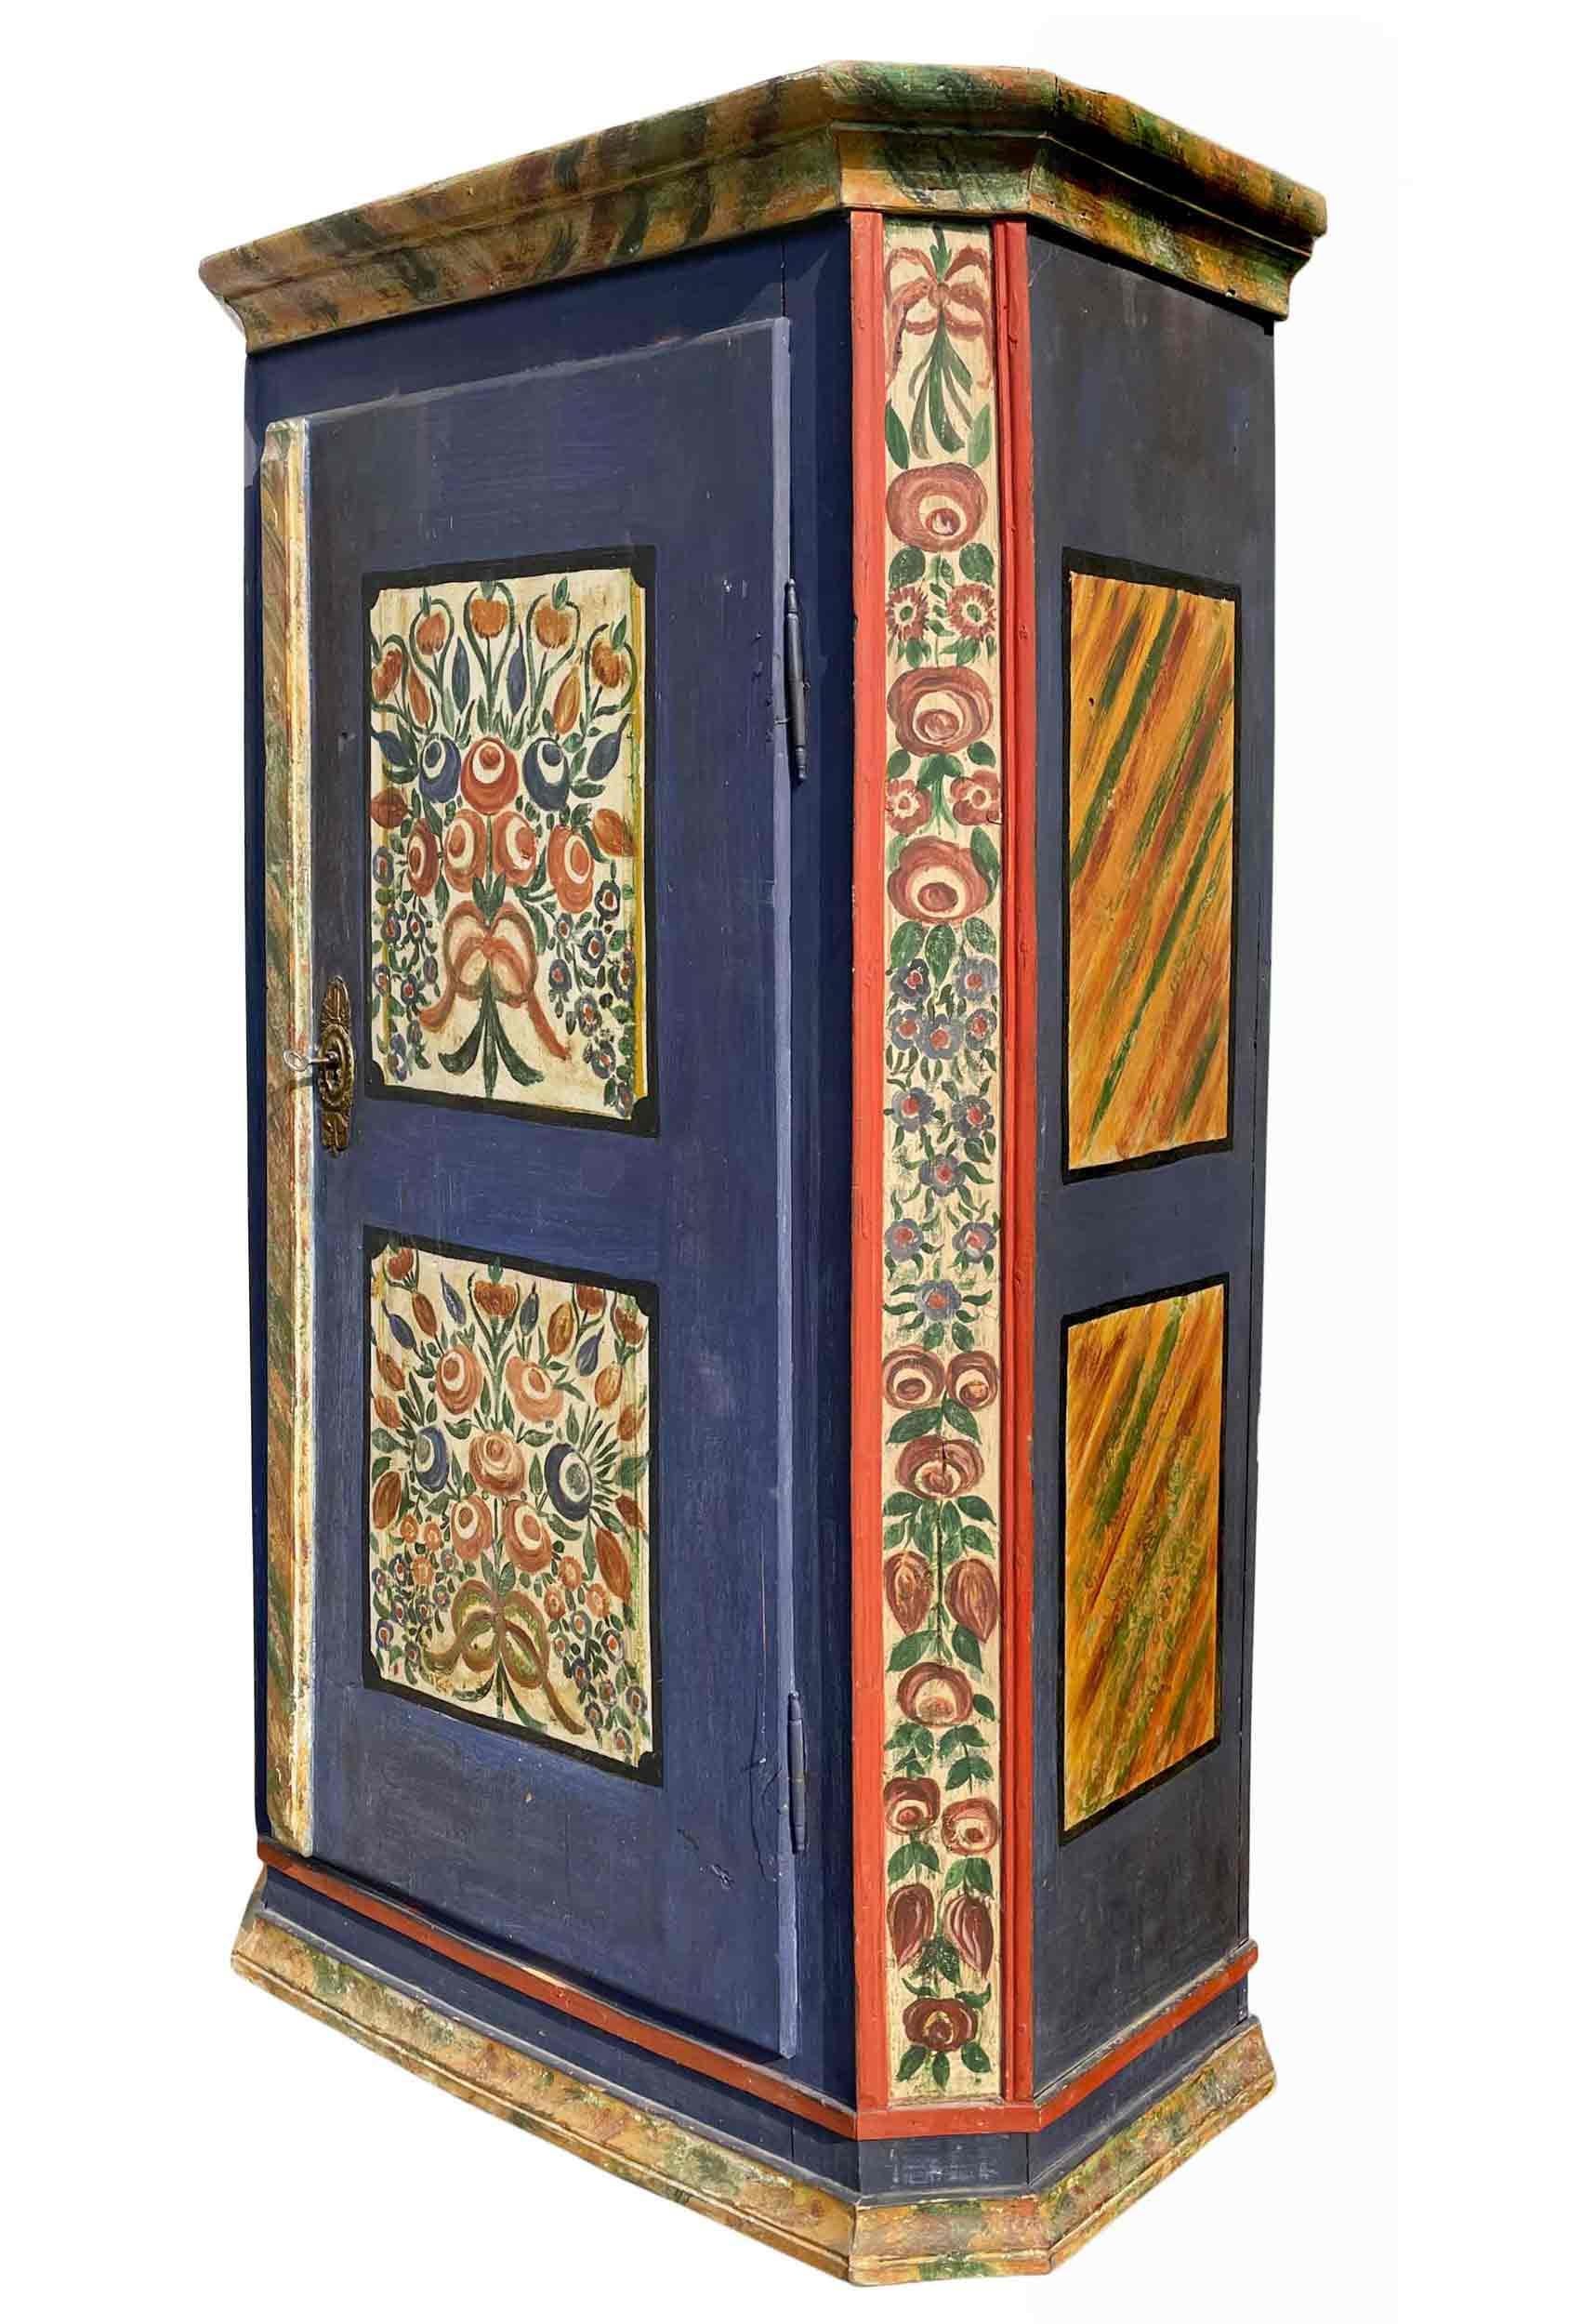 Tyrolean blue painted wardrobe

H. 170cm - L. 93cm (103cm to the frames) - P. 47cm (52cm to the frames)

Tyrolean painted wardrobe with one door, entirely painted in blue.
On the door two large backgrounds contain floral compositions, repeated